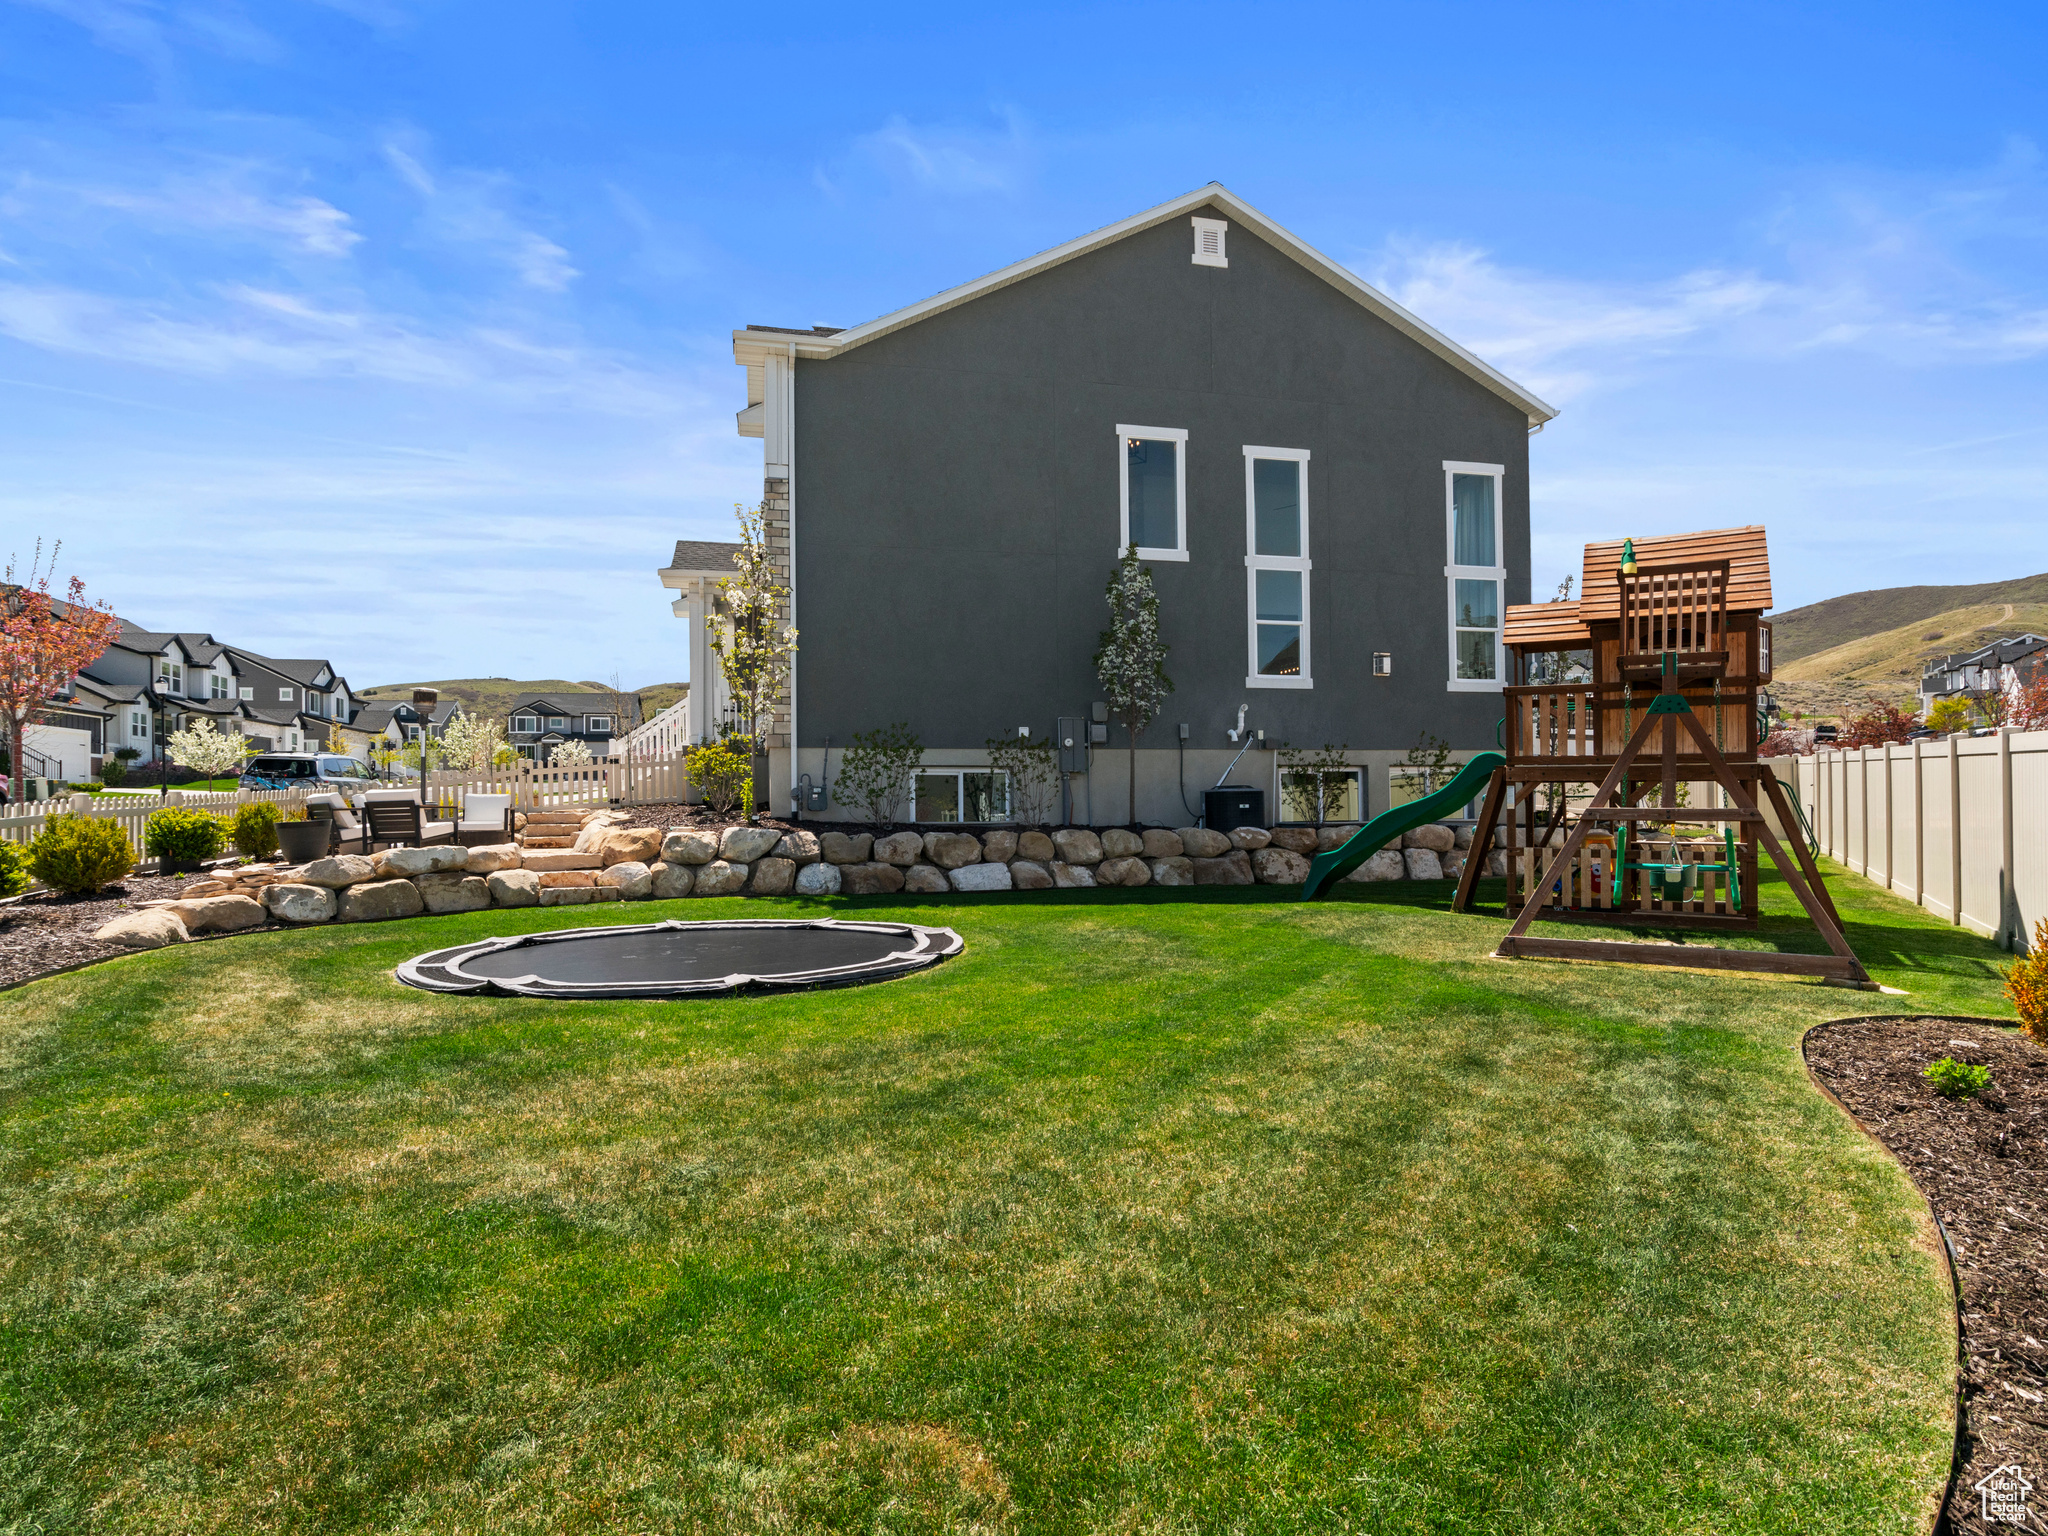 Front and side yard are home to the in ground trampoline and play structure.